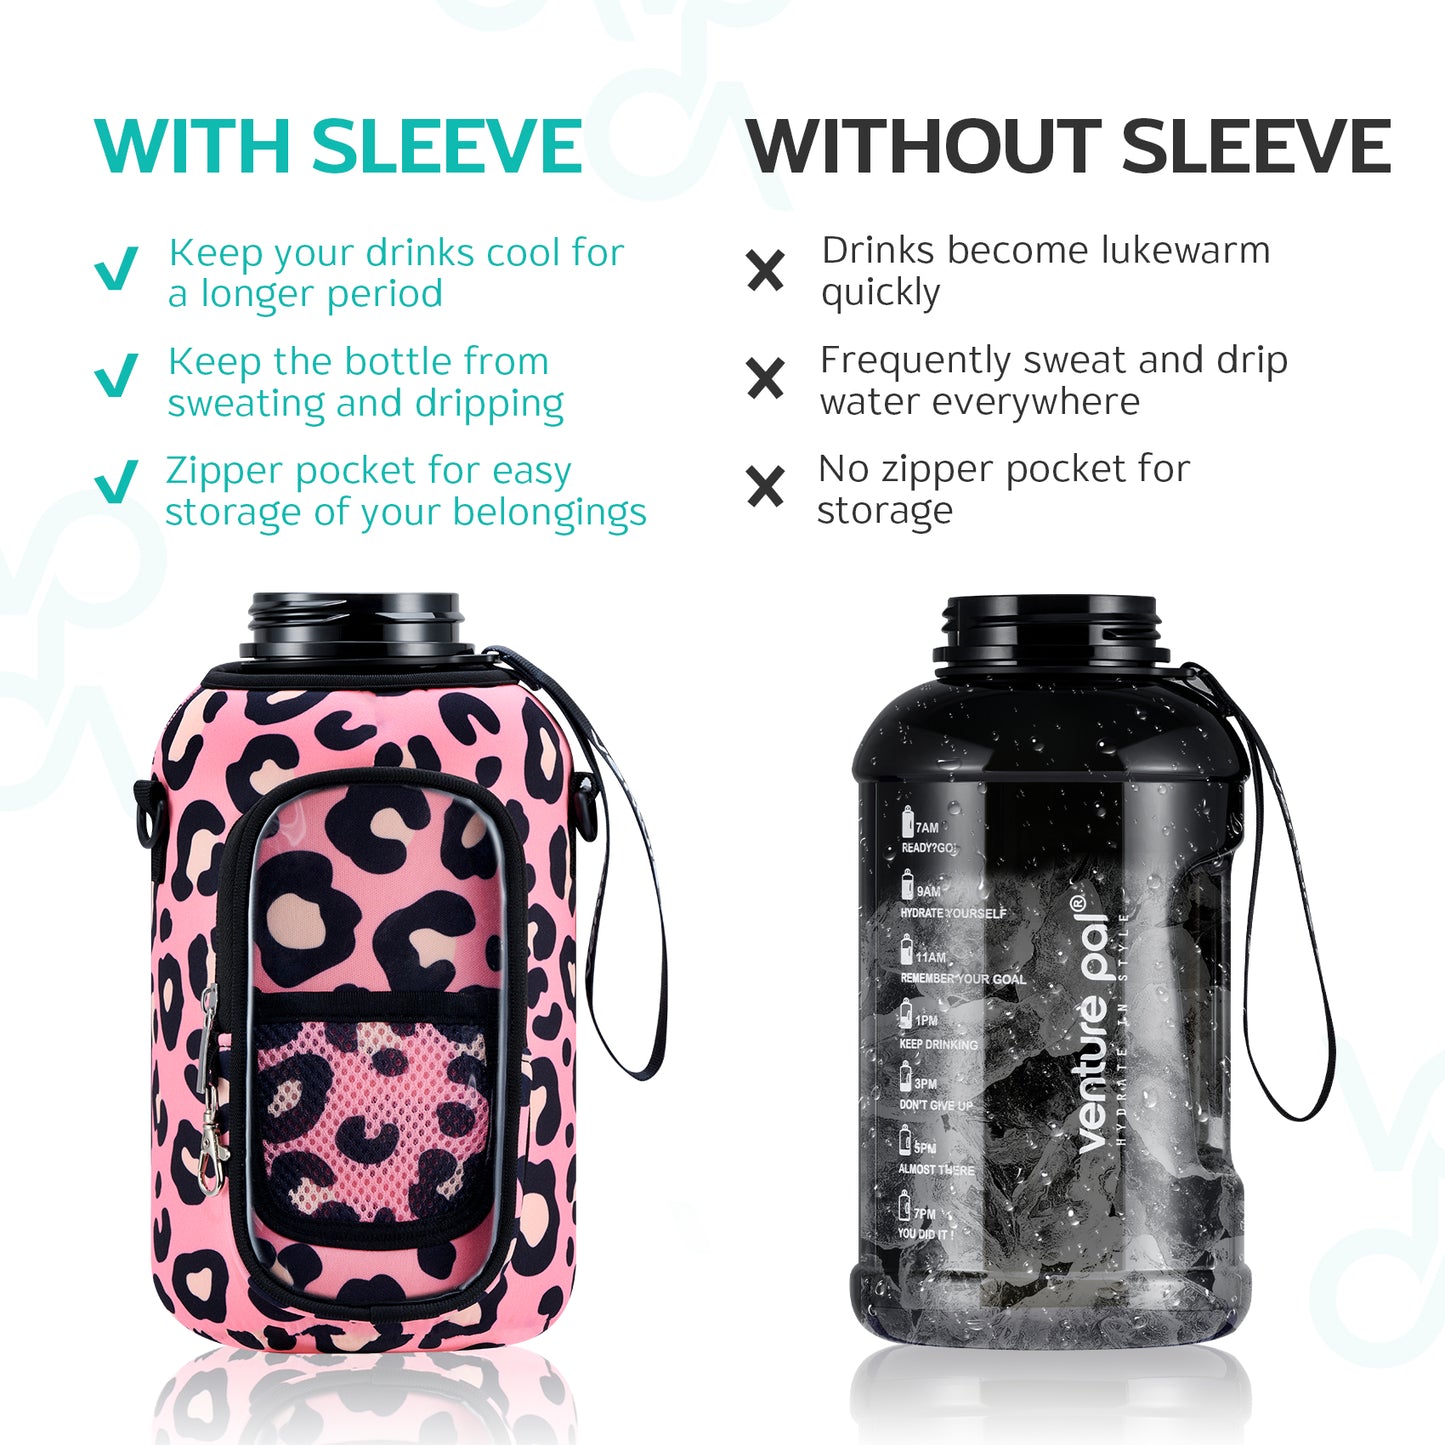 Venture Pal 64 oz Motivational Water Bottle with Storage Sleeve and Adjustable Strap - Comes with a Complimentary Cleaning Brush and Straw Brush